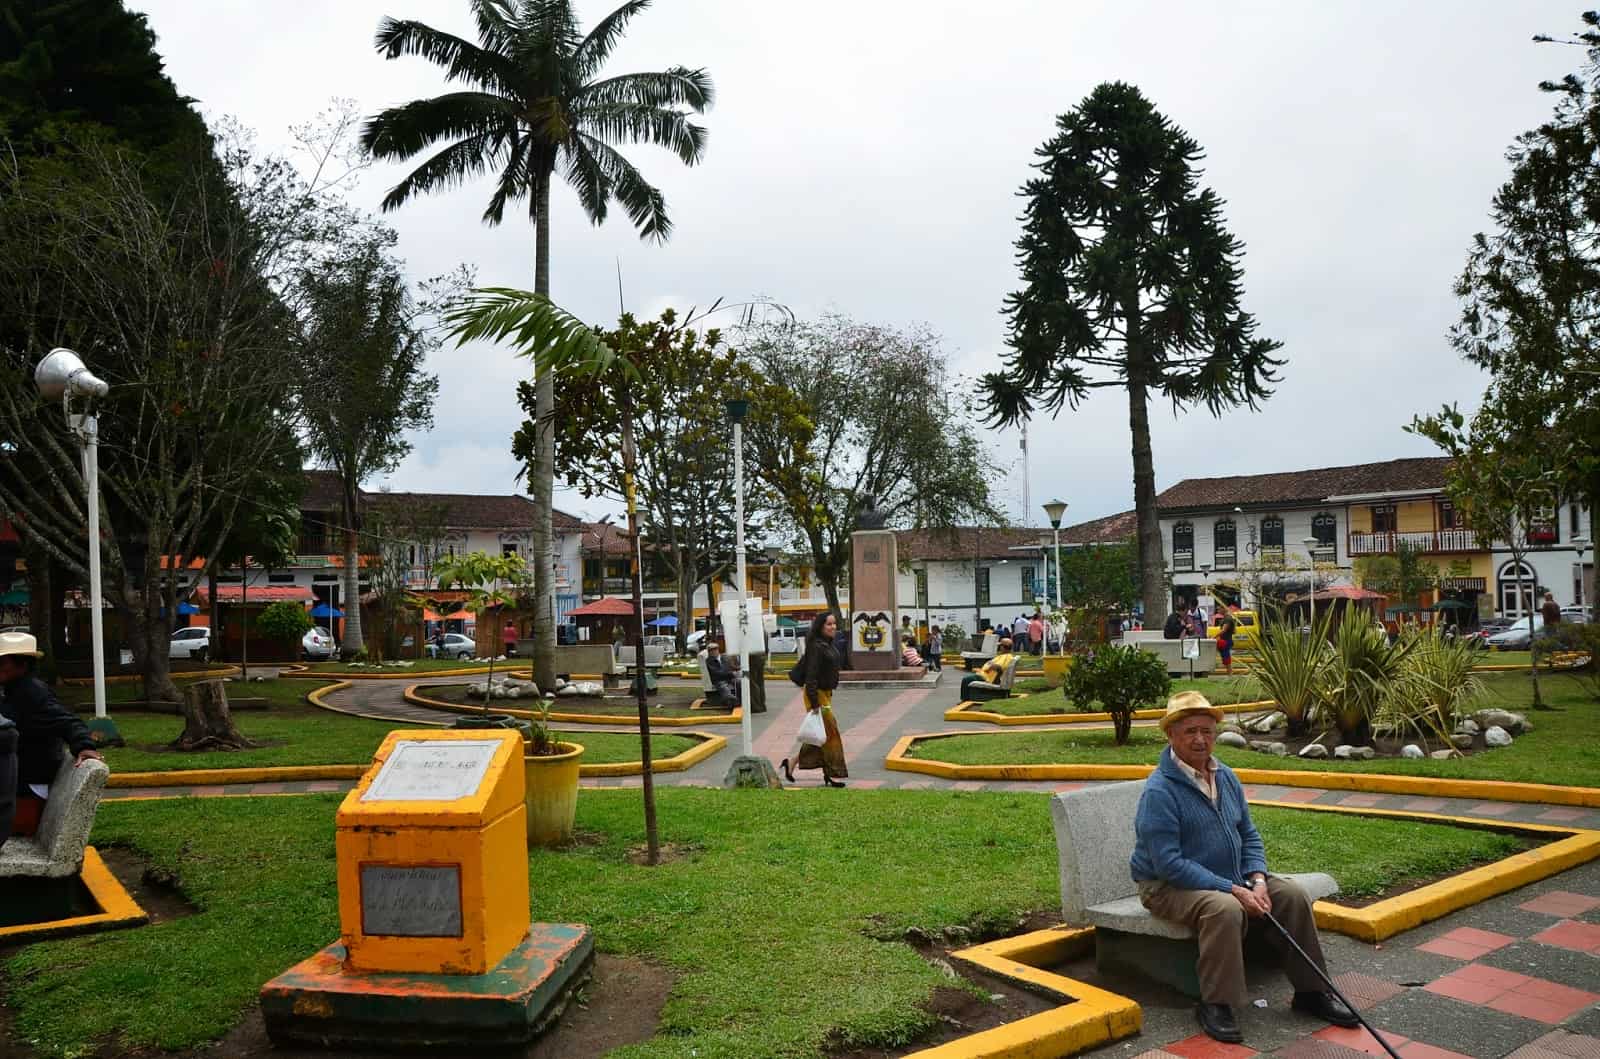 Looking at the plaza in September 2014 in Filandia, Quindío, Colombia